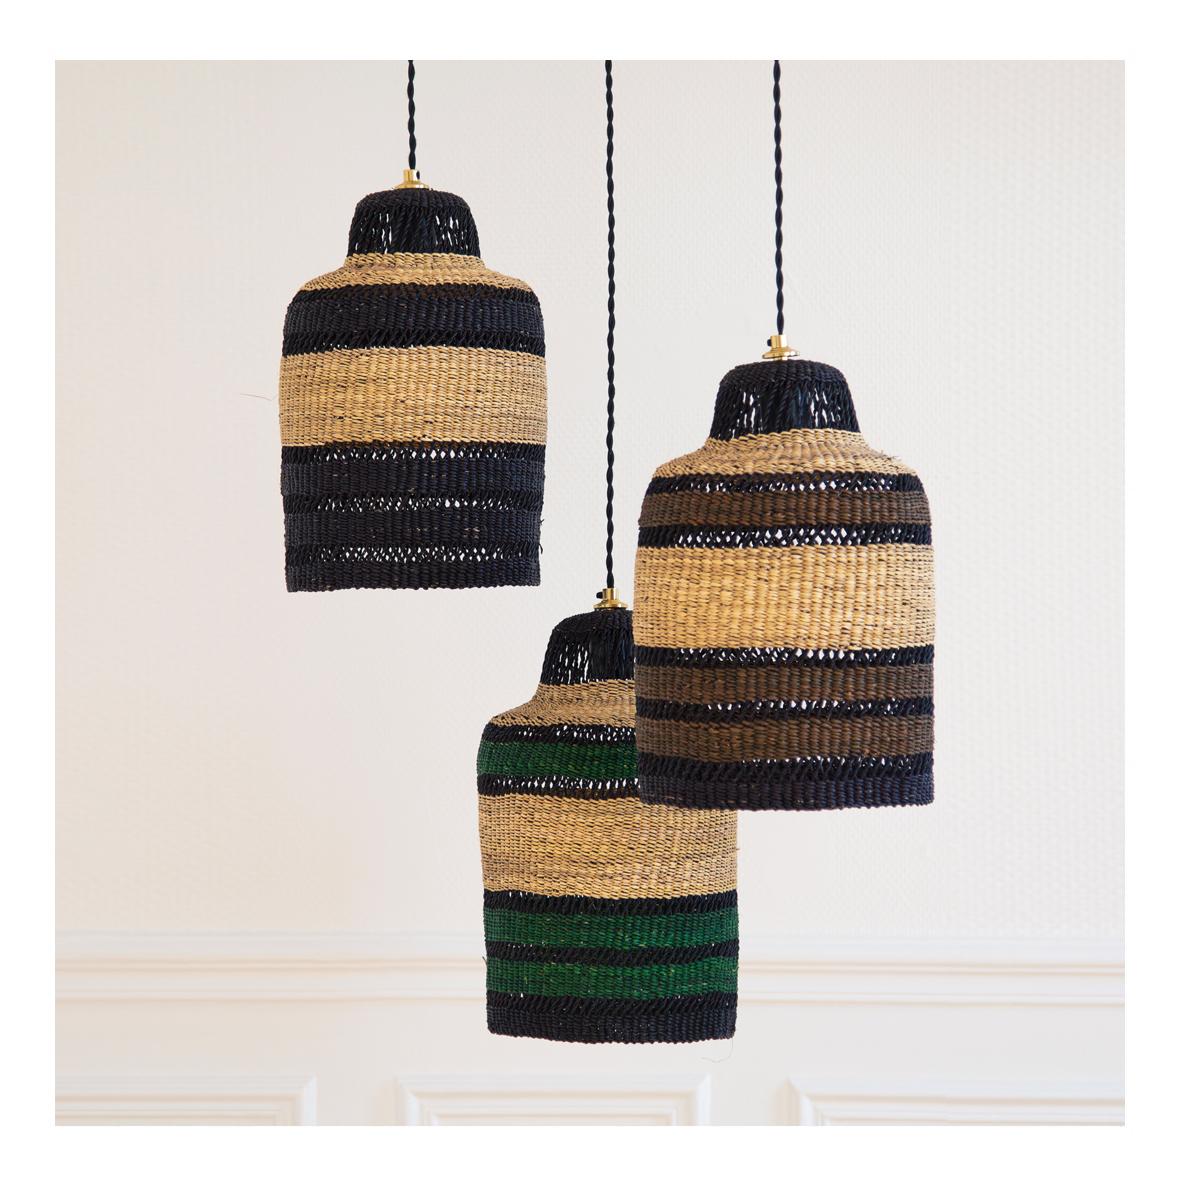 Small woven pendant lamp high life s : 
Earthy Artisanat
Colour: Noisette (earthy brown)

Are you looking for a small lamp that feels chic and earthy? This small black and brown pendant lamp will fill your room with patterns This beautifully